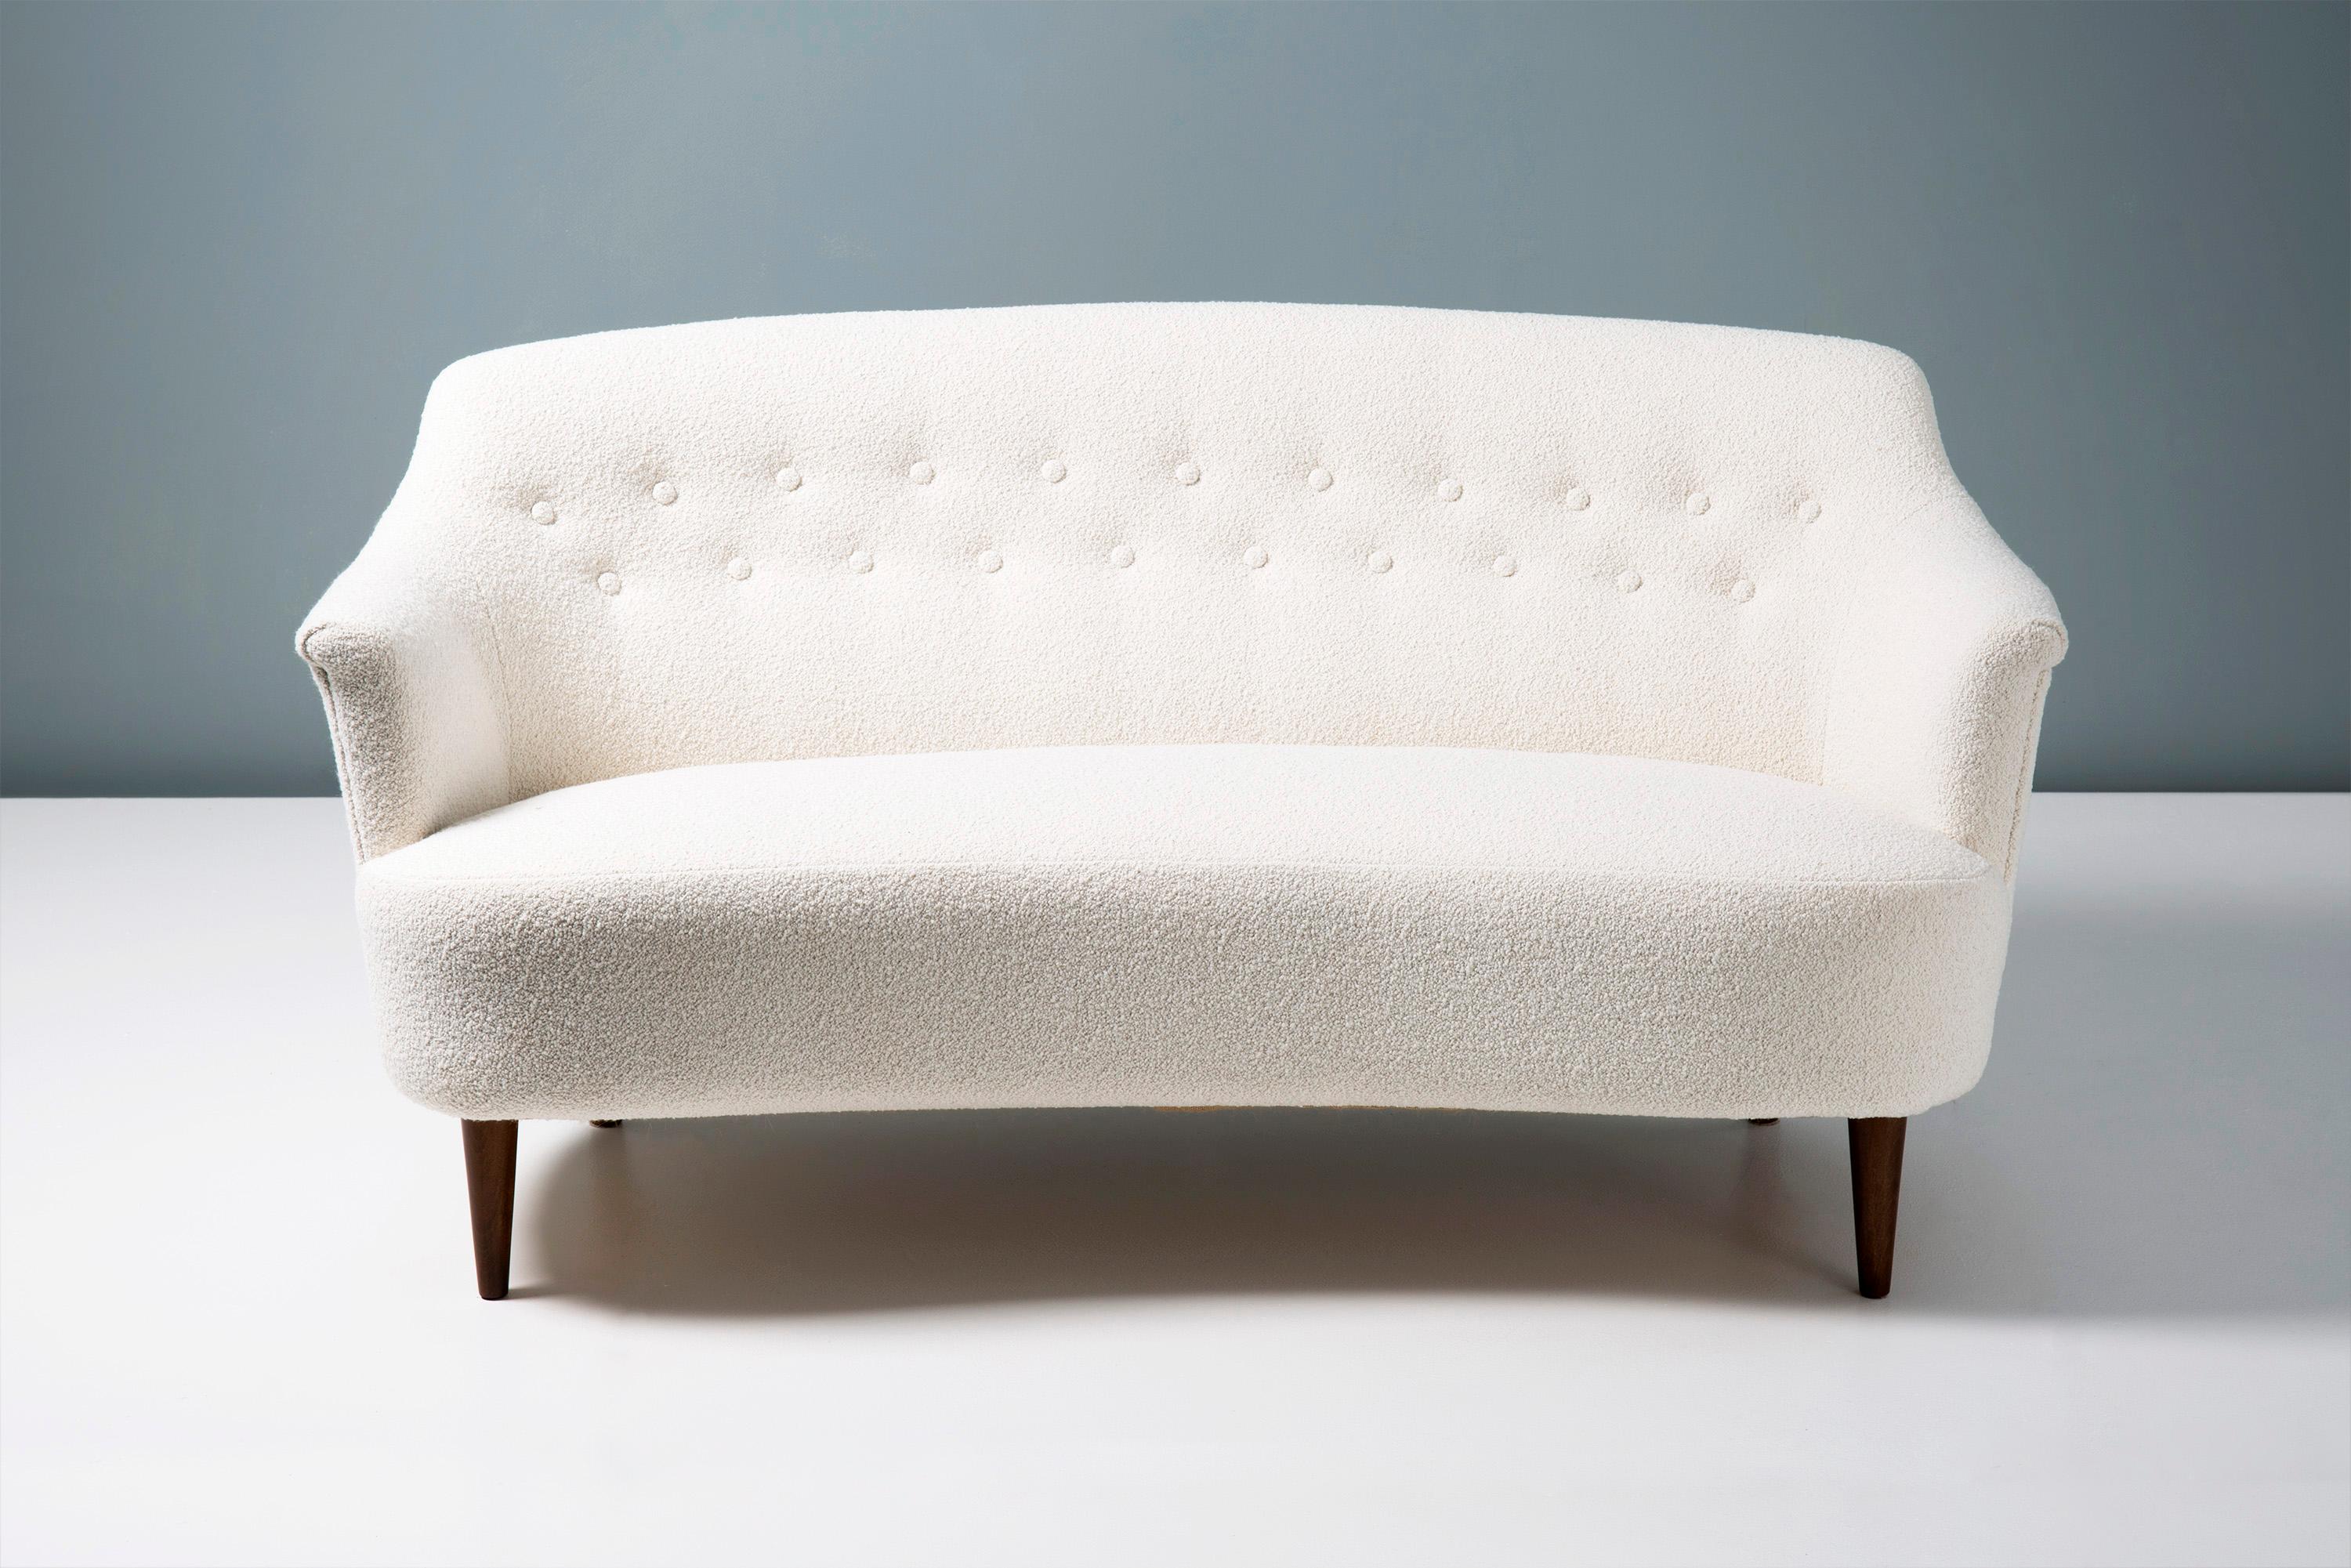 This exceptional piece of Swedish furniture was designed in the 1940s by master cabinetmaker & designer Carl Malmsten. It was produced at his own workshop near Stockholm in Sweden. This example has been reupholstered in luxurious cotton-wool blend